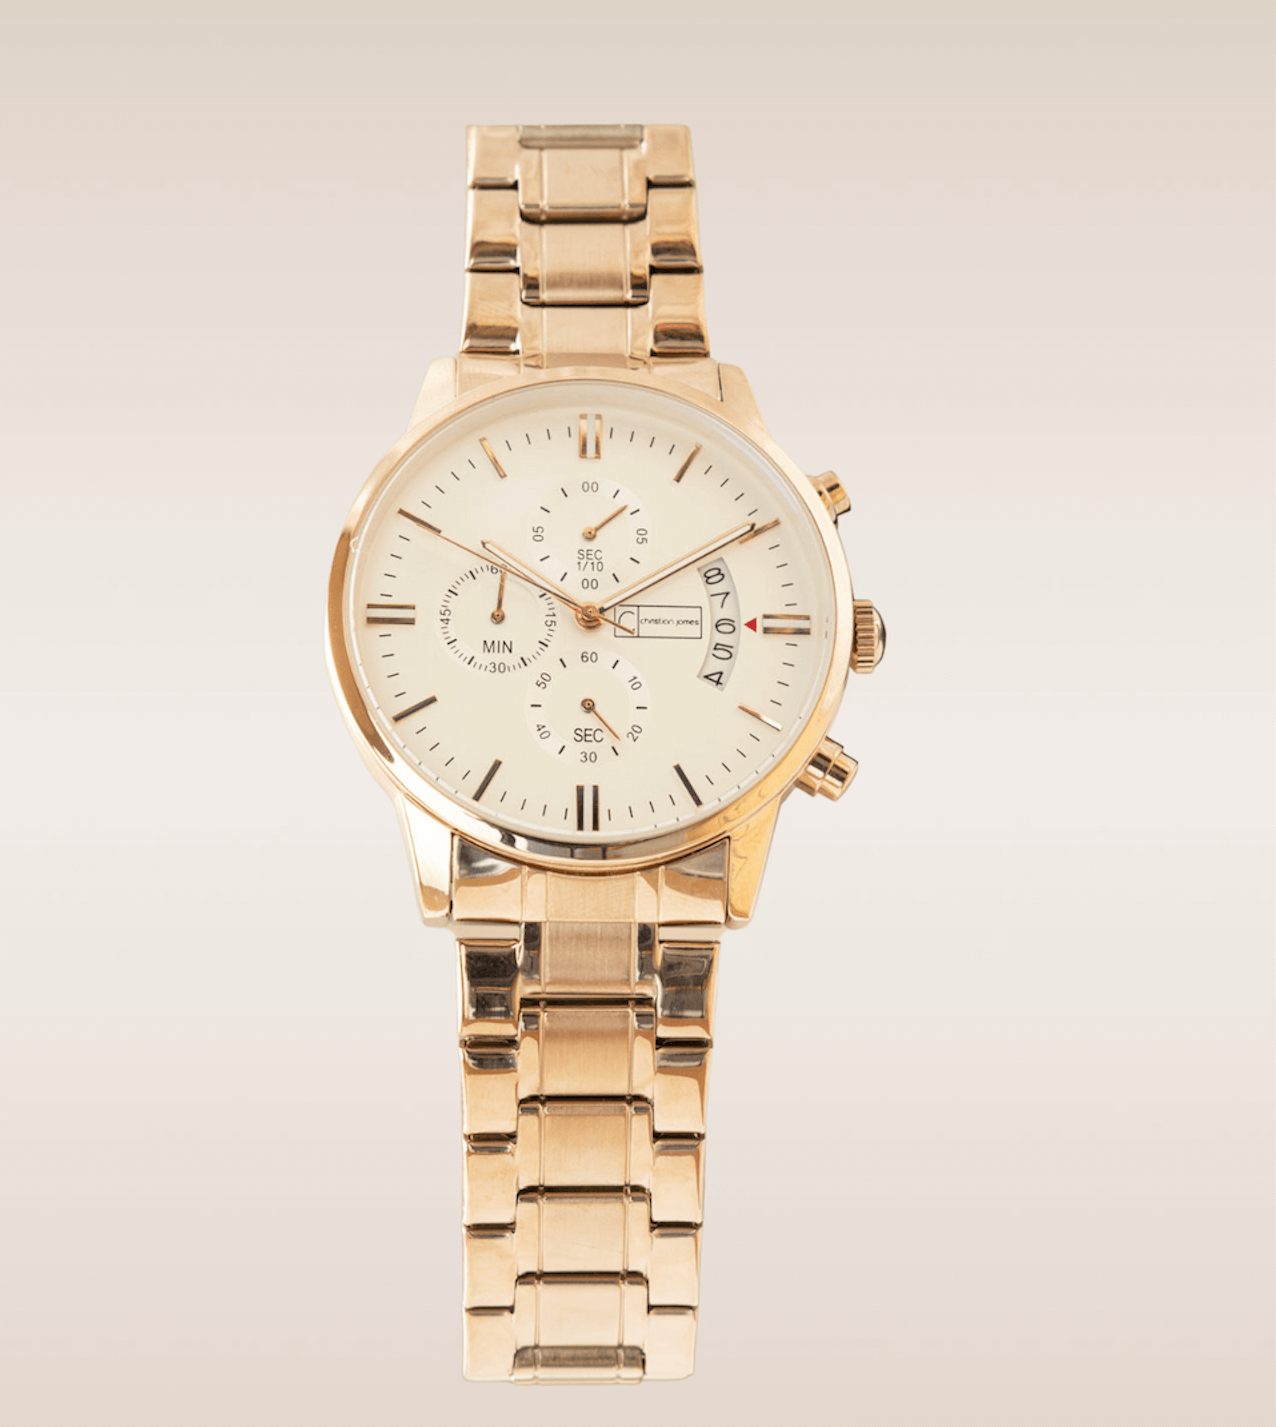 In this up-close shot, we are presented with the captivating Aphrodite Timepiece, an exquisite blend of elegance and luxury. The watch features a cream-colored watch face that exudes a sense of refined sophistication. The face is encased in shimmering gold, adding a touch of opulence and timeless beauty. The watch hands, also in gold, move gracefully across the face, marking the passage of time with precision. 